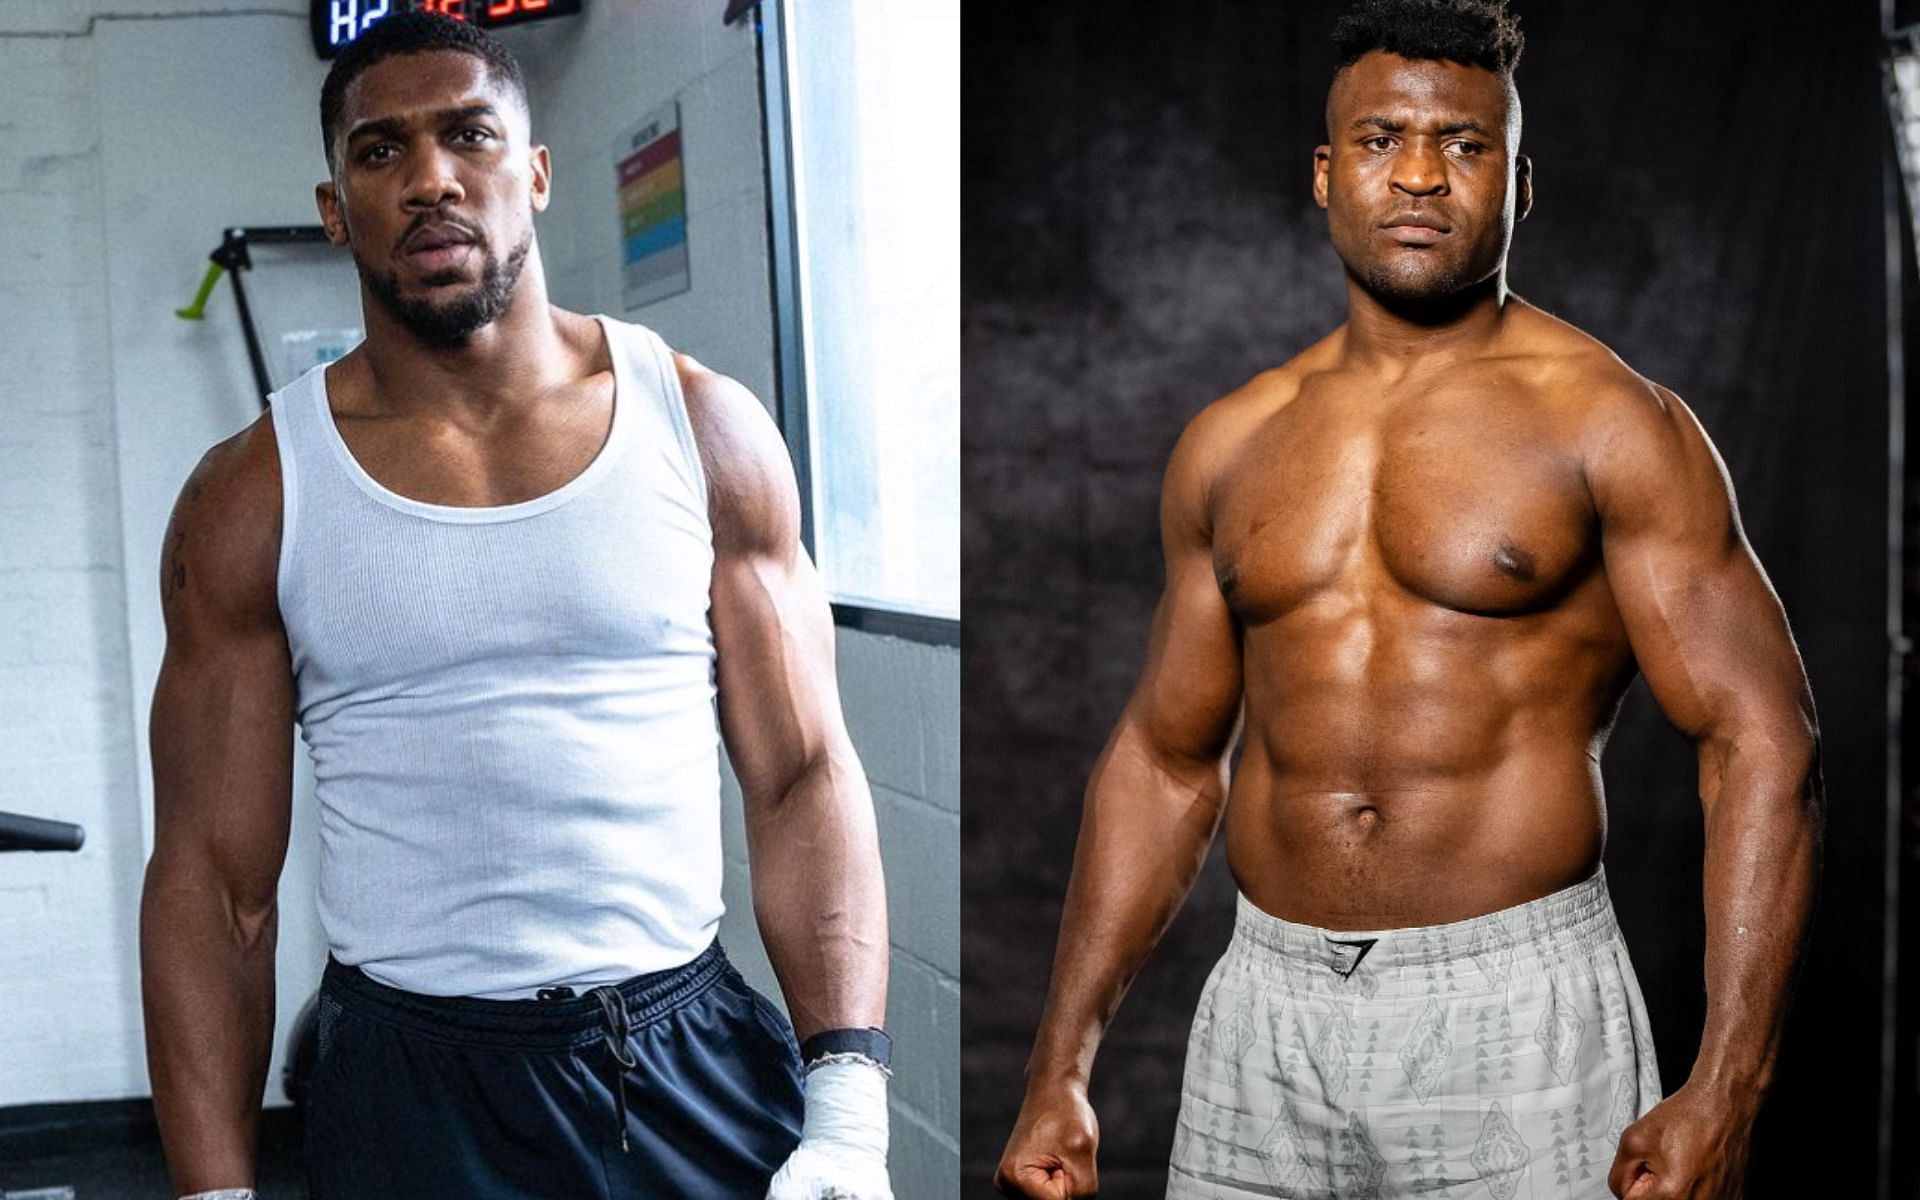 Anthony Joshua (left) and Francis Ngannou (right) is a battle of two goliaths, says Eddie Hearn [Images Courtesy: @francisngannou and @anthonyjoshua on Instagram]